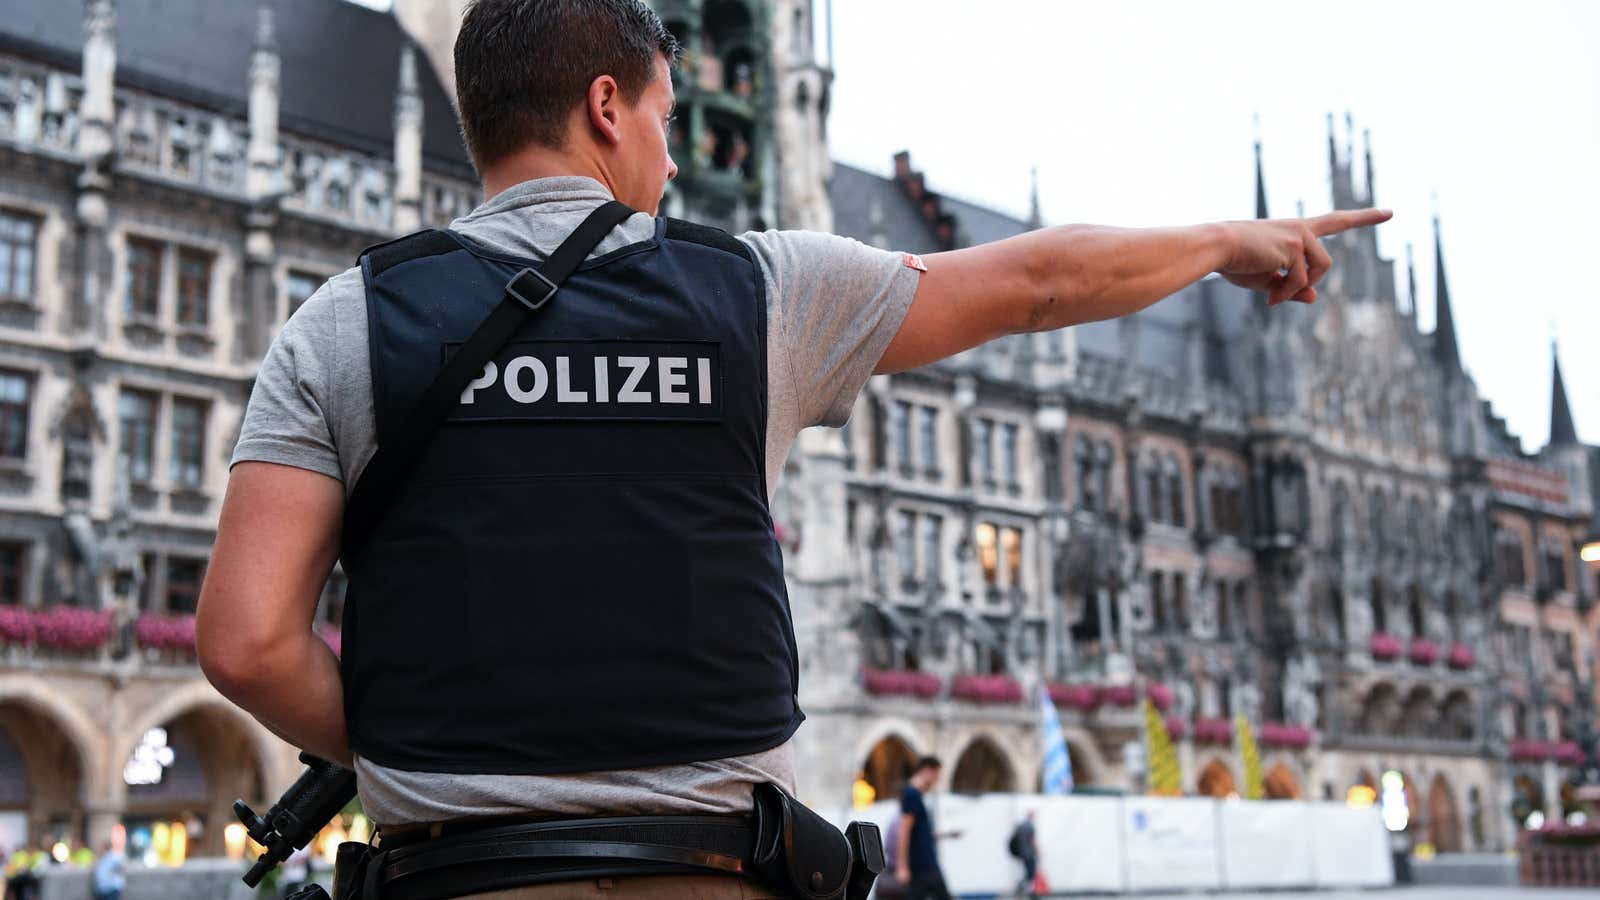 A Munich policeman secures an area of the city after a shooting spree on July 22.